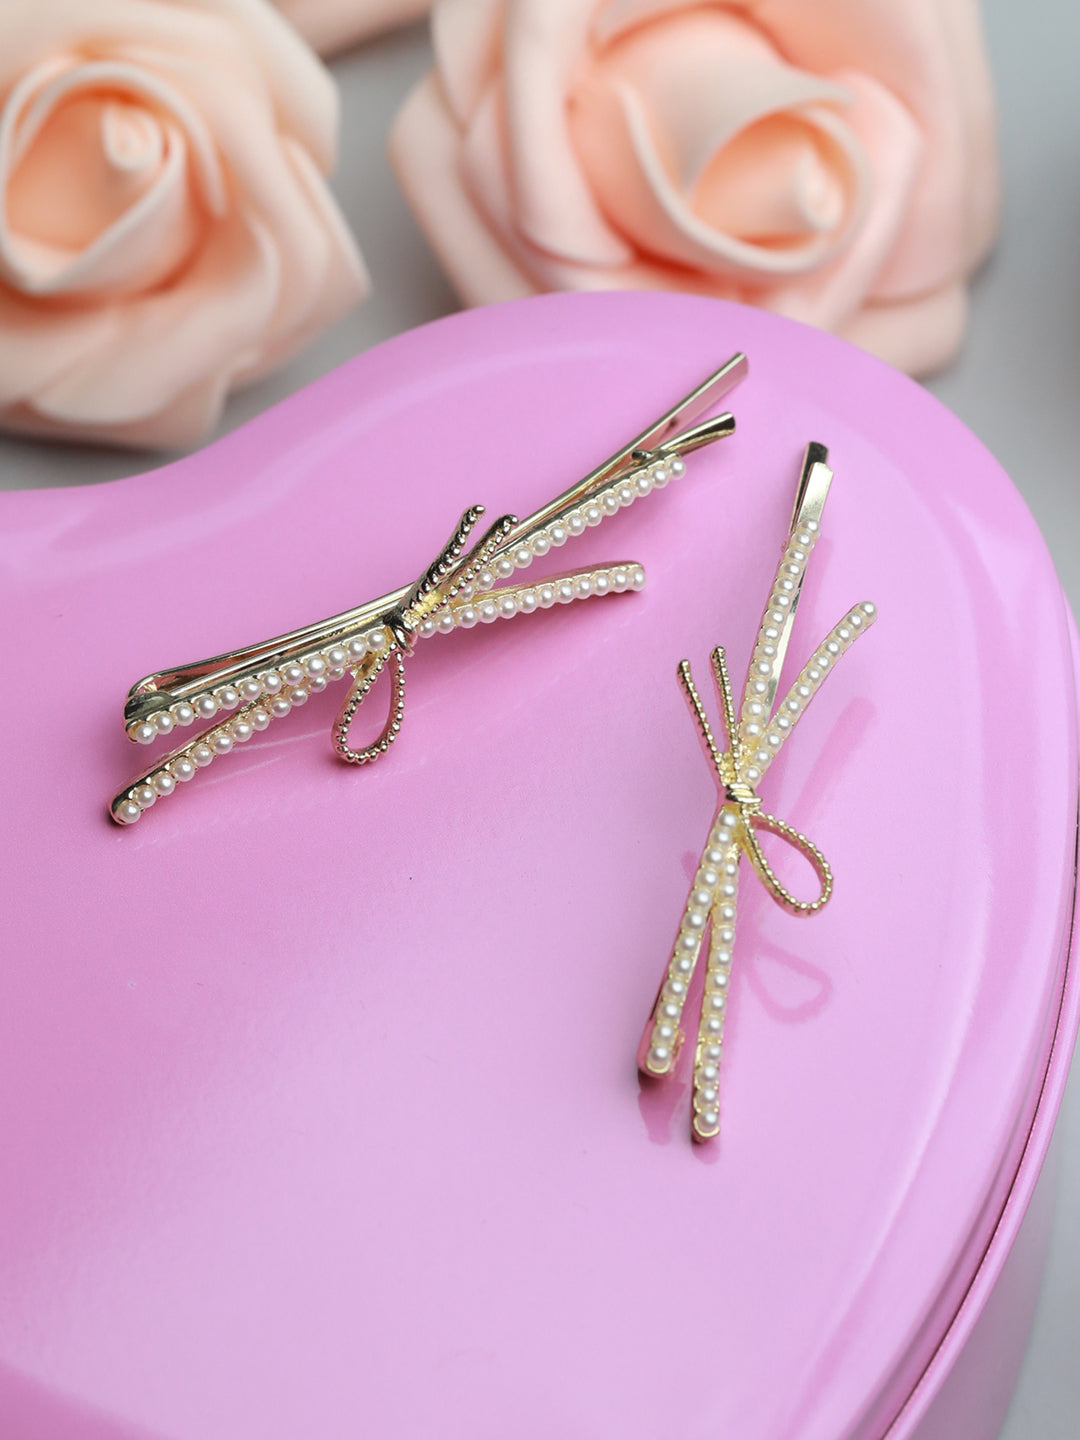 White Pearl Studded Hair Pin Set